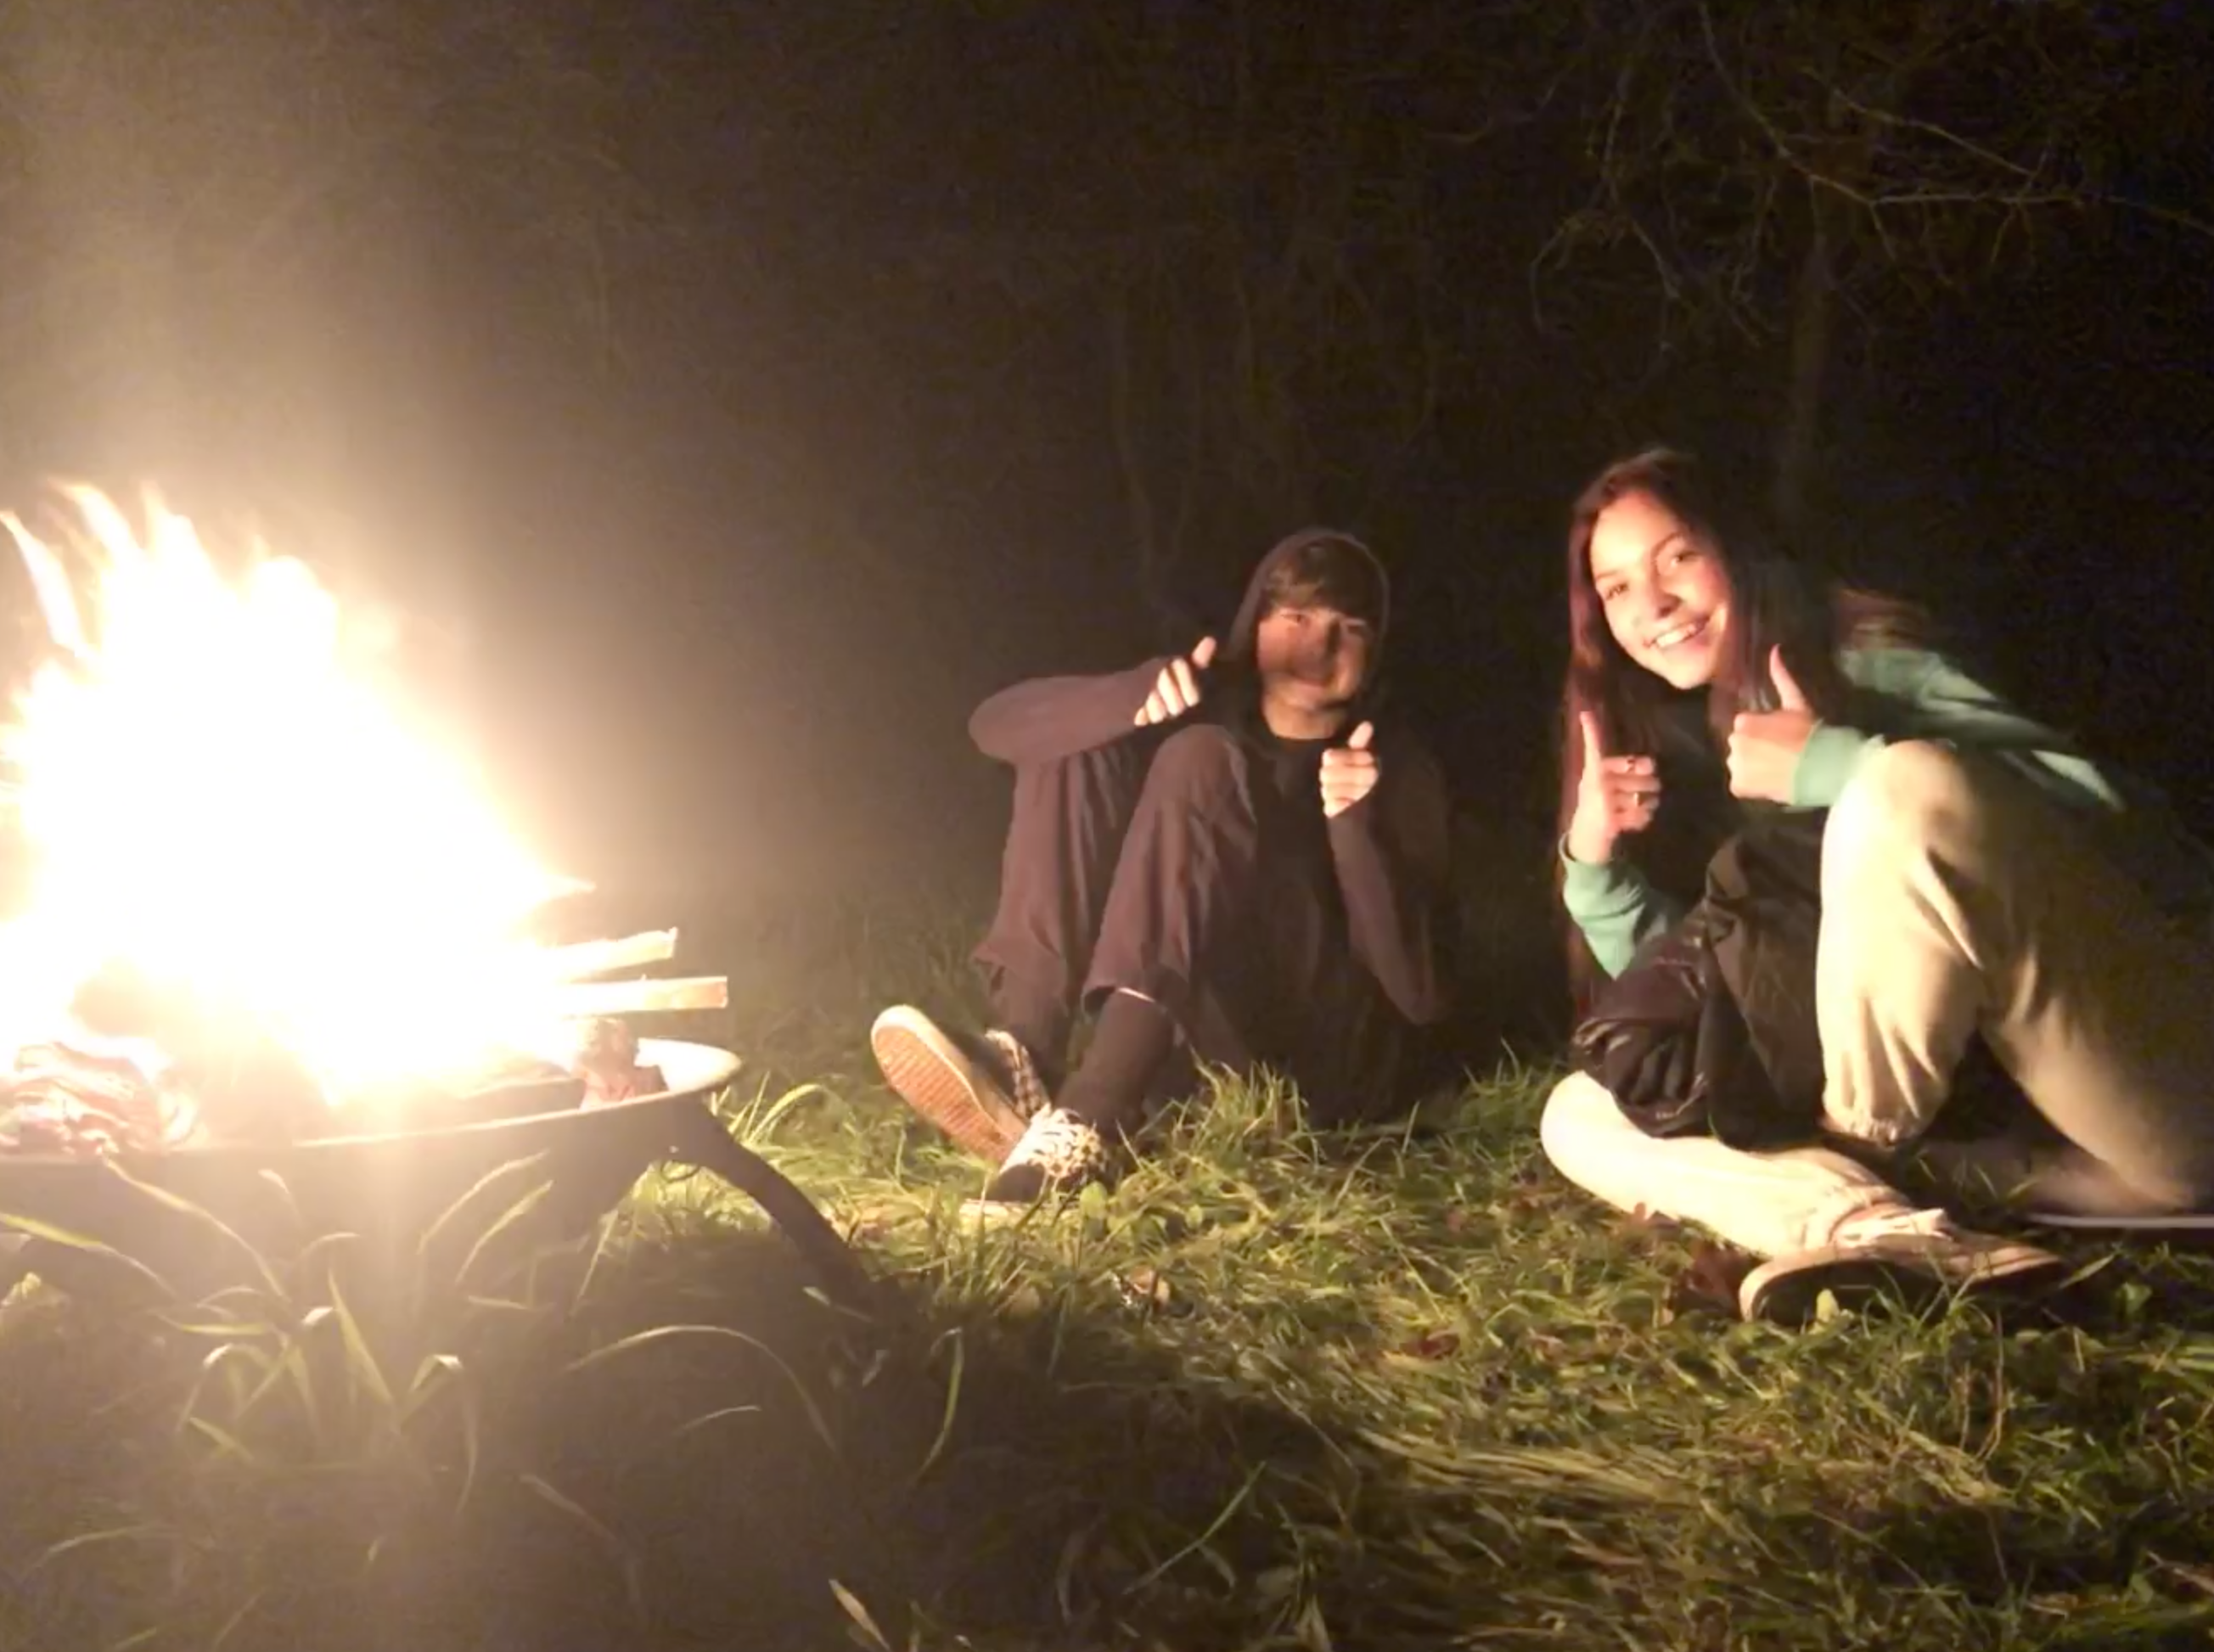 Two girls sat by a fire giving the thumbs up